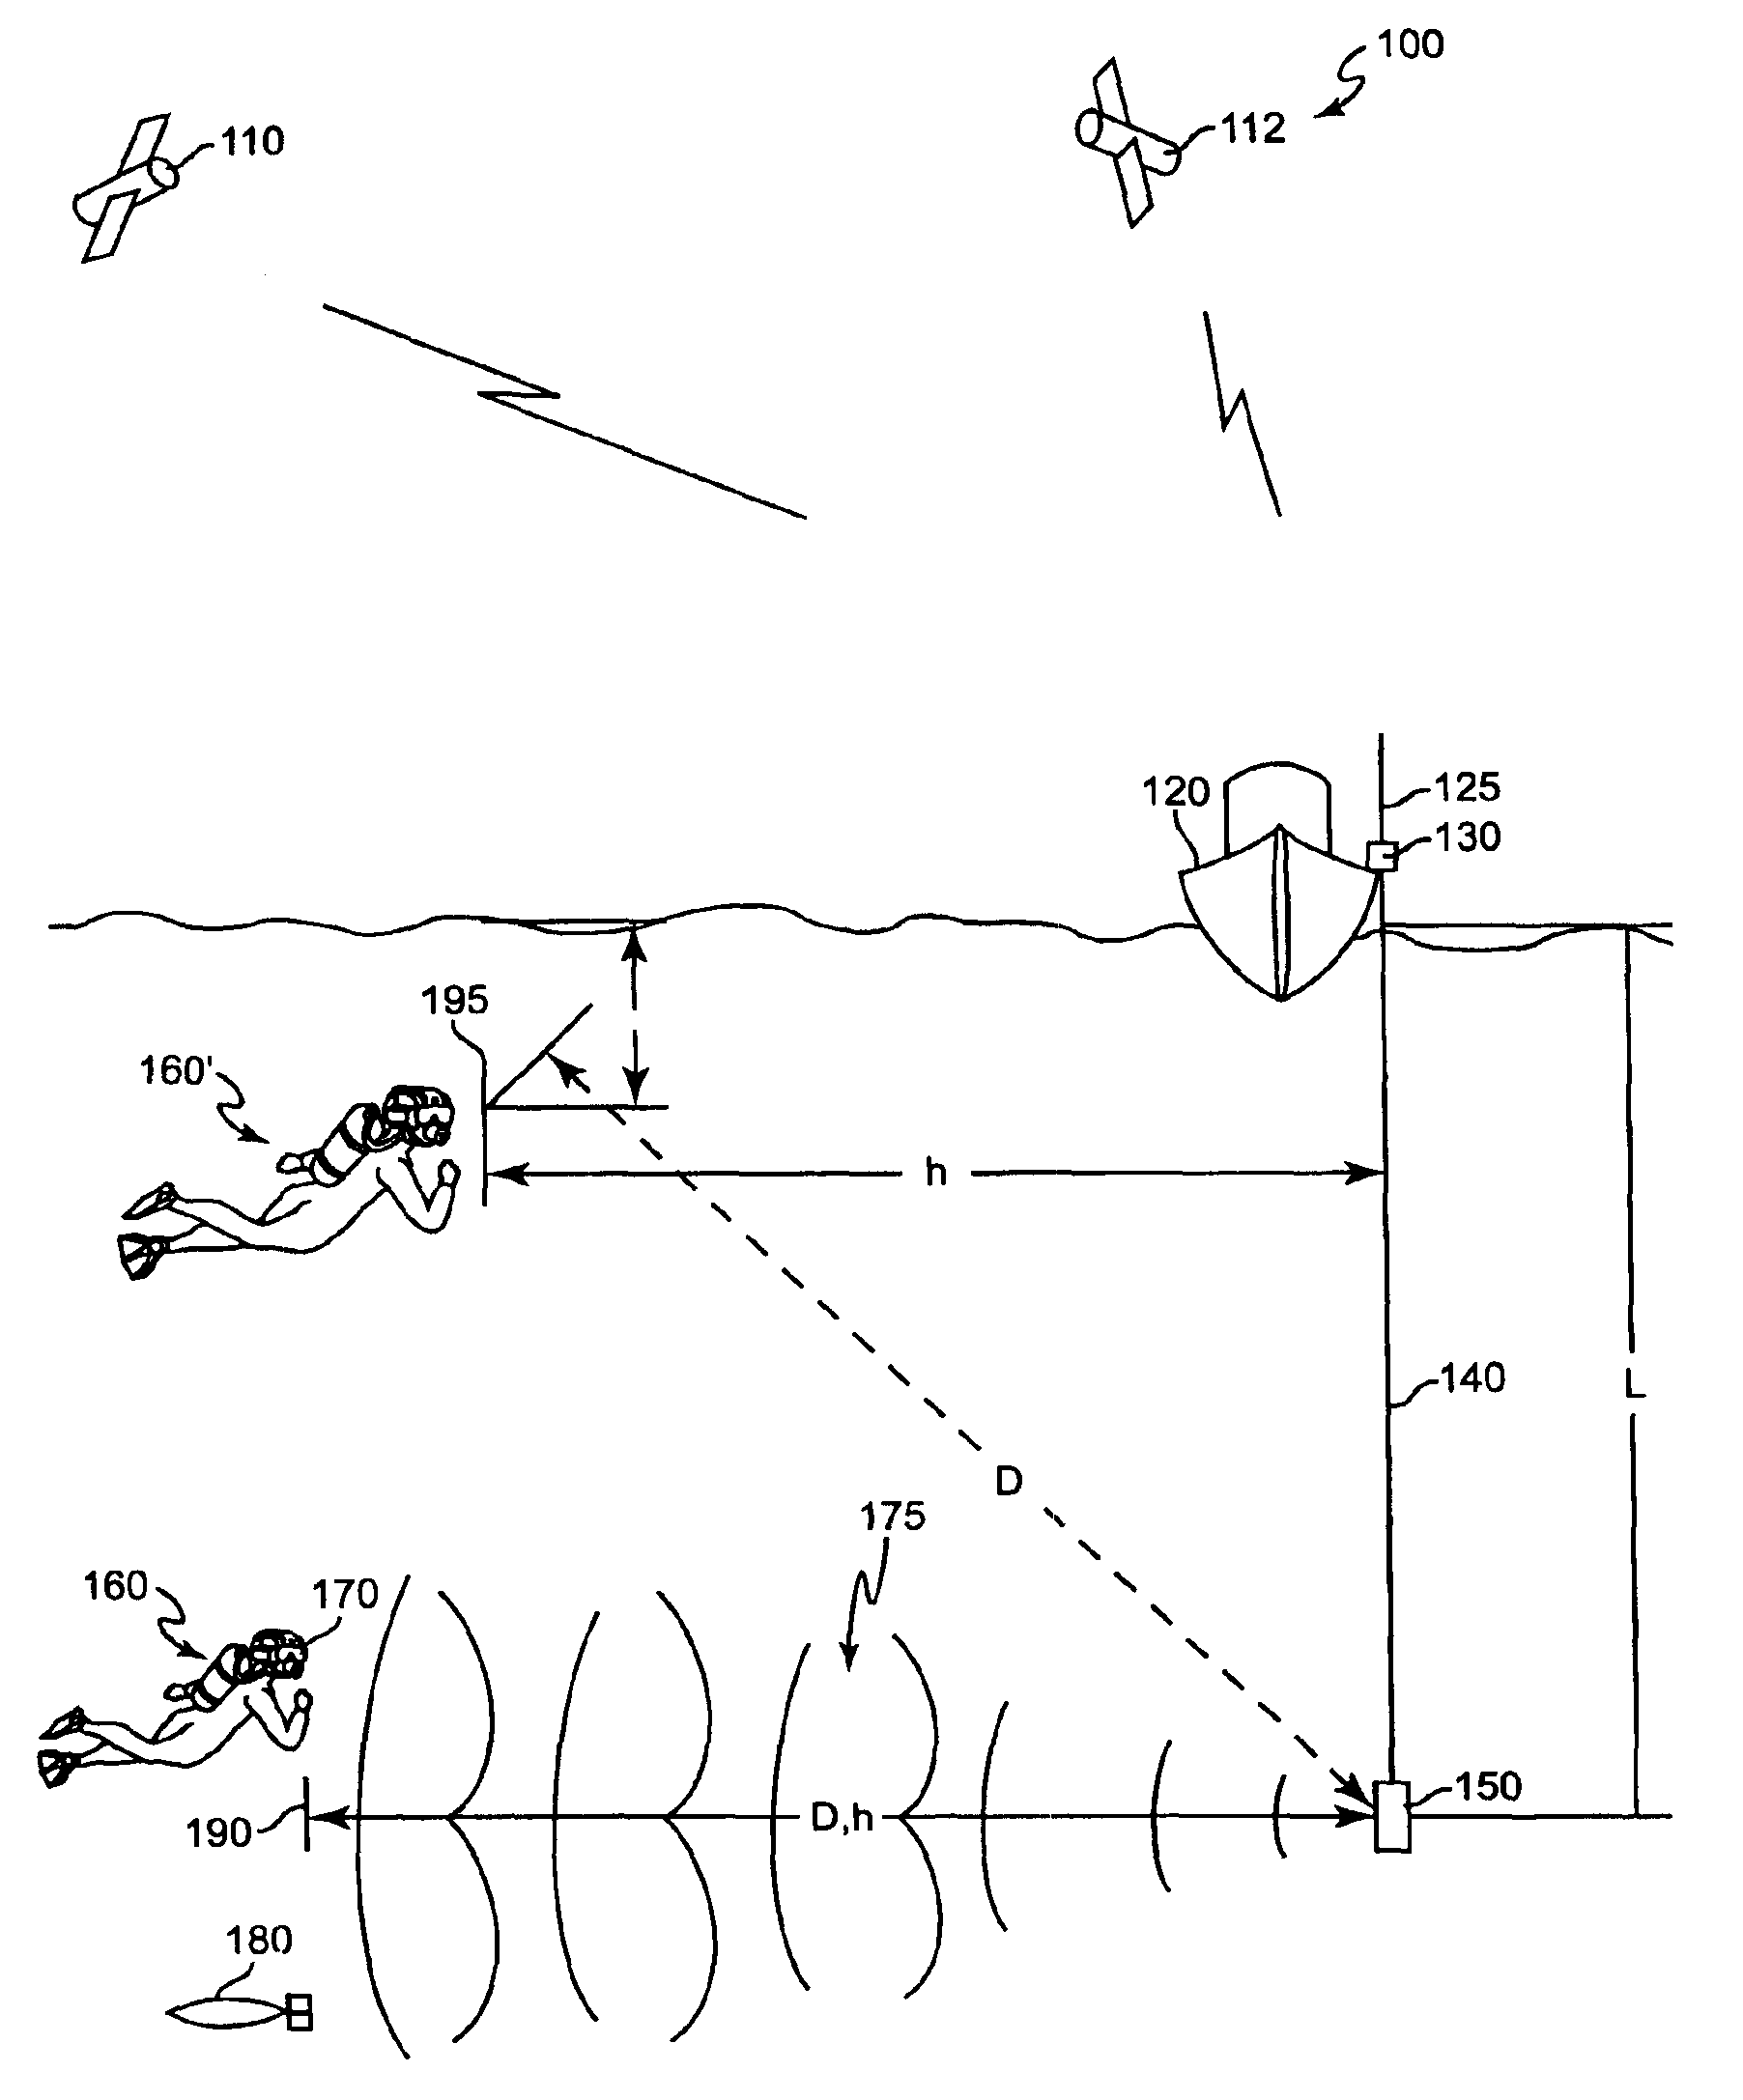 Method for determining, recording and sending GPS location data in an underwater environment